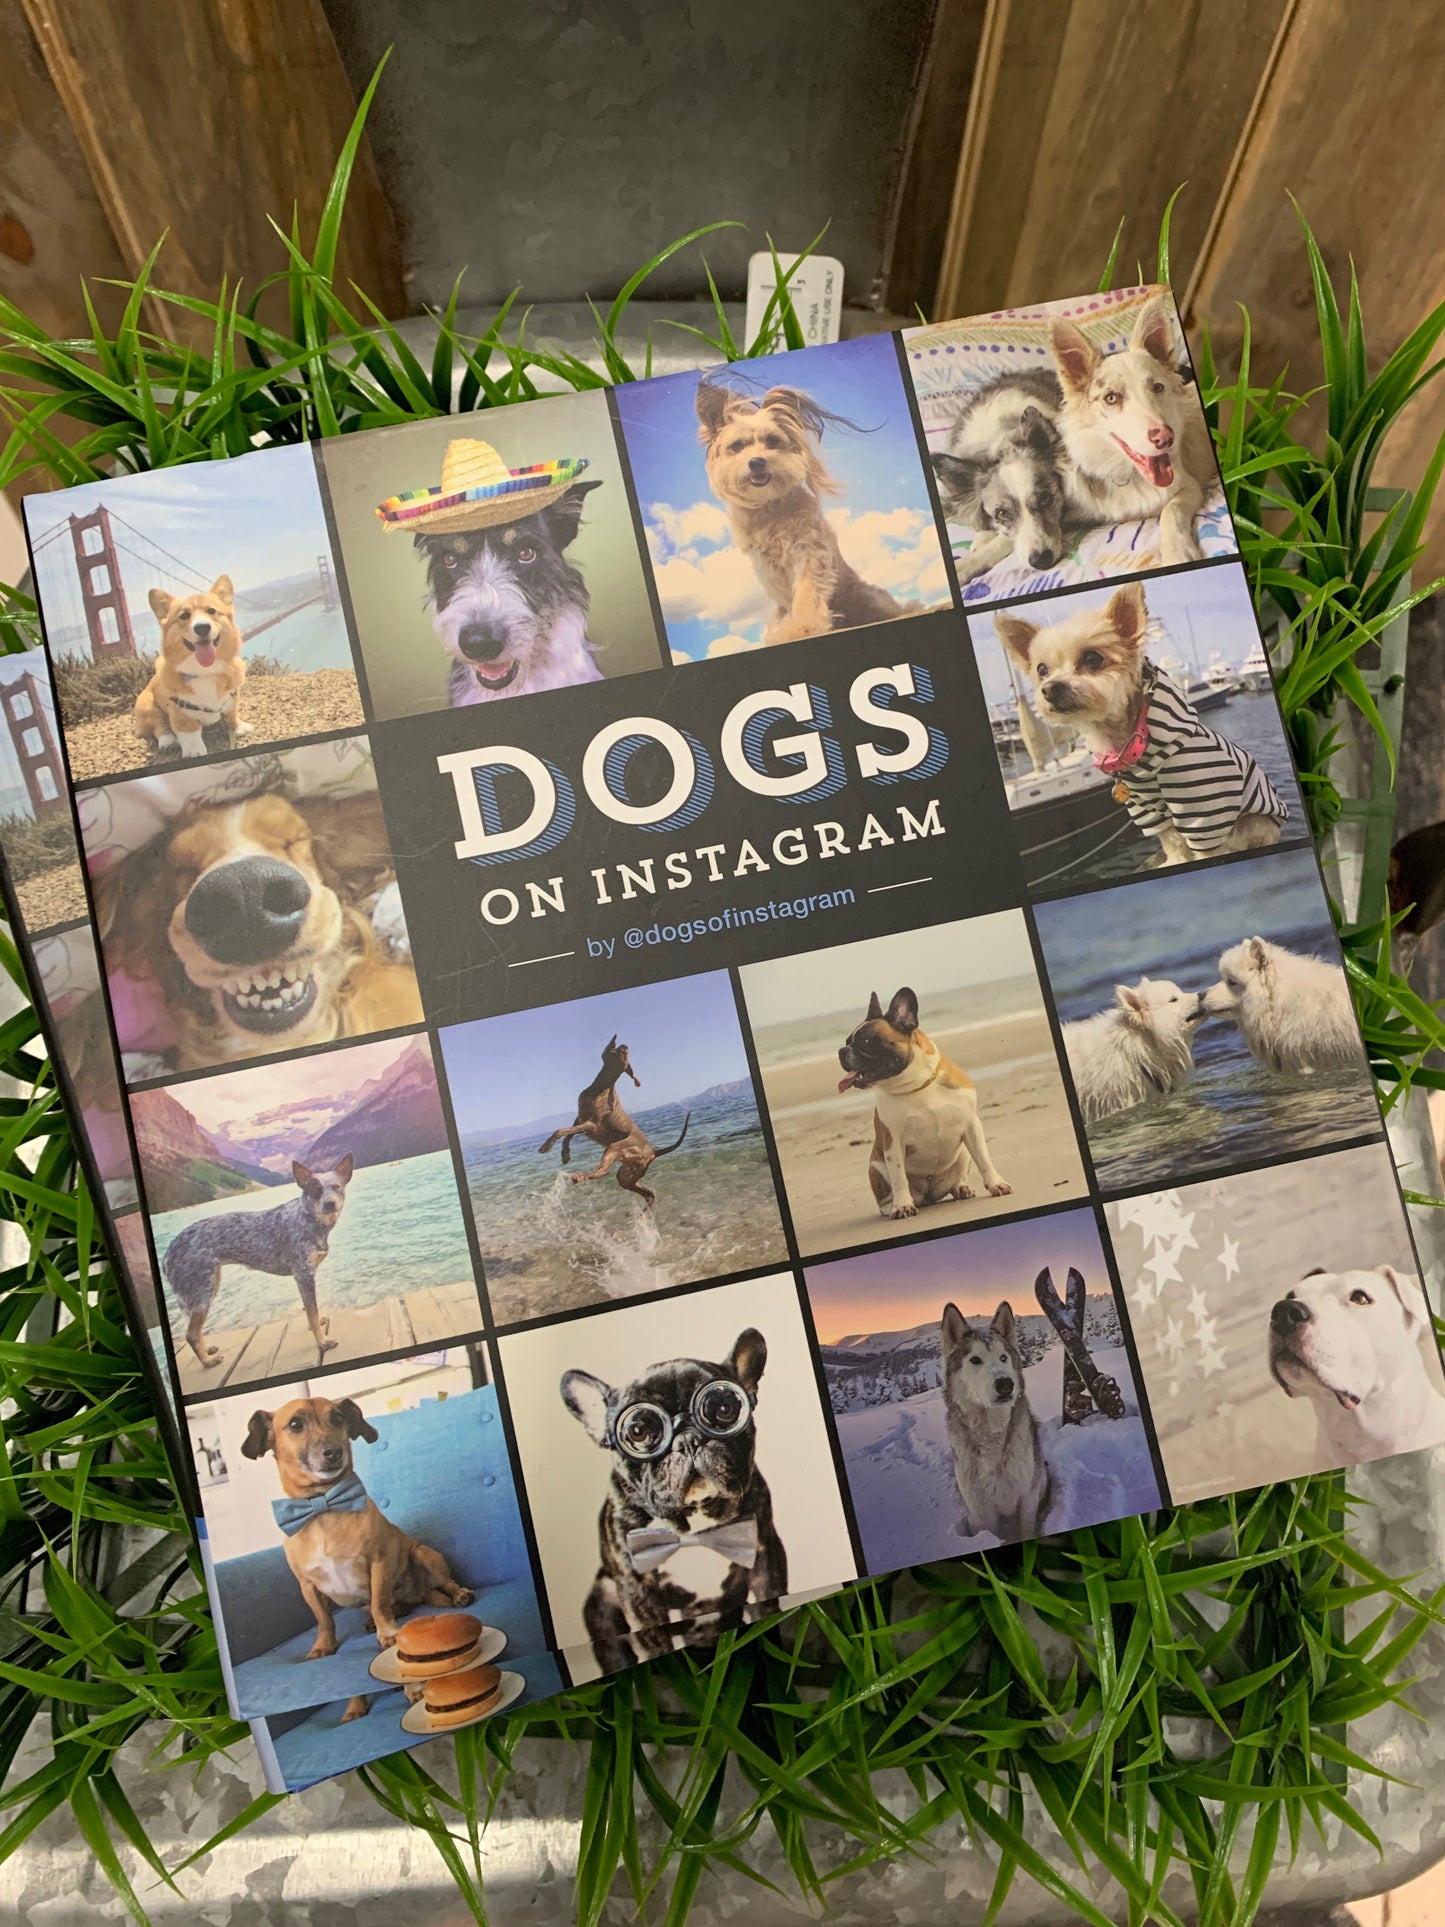 Dog lovers are a passionate bunch, and Instagram is the perfect platform for expressing their devotion. The curators behind @dogsofinstagram channel this passion perfectly in this delightful book, a must-have collection featuring over 400 of the best crowdsourced dog photographs from their wildly popular feed. For dog lovers by dog lovers, this eclectic compilation celebrates the full spectrum of things to love about our four-legged friends.